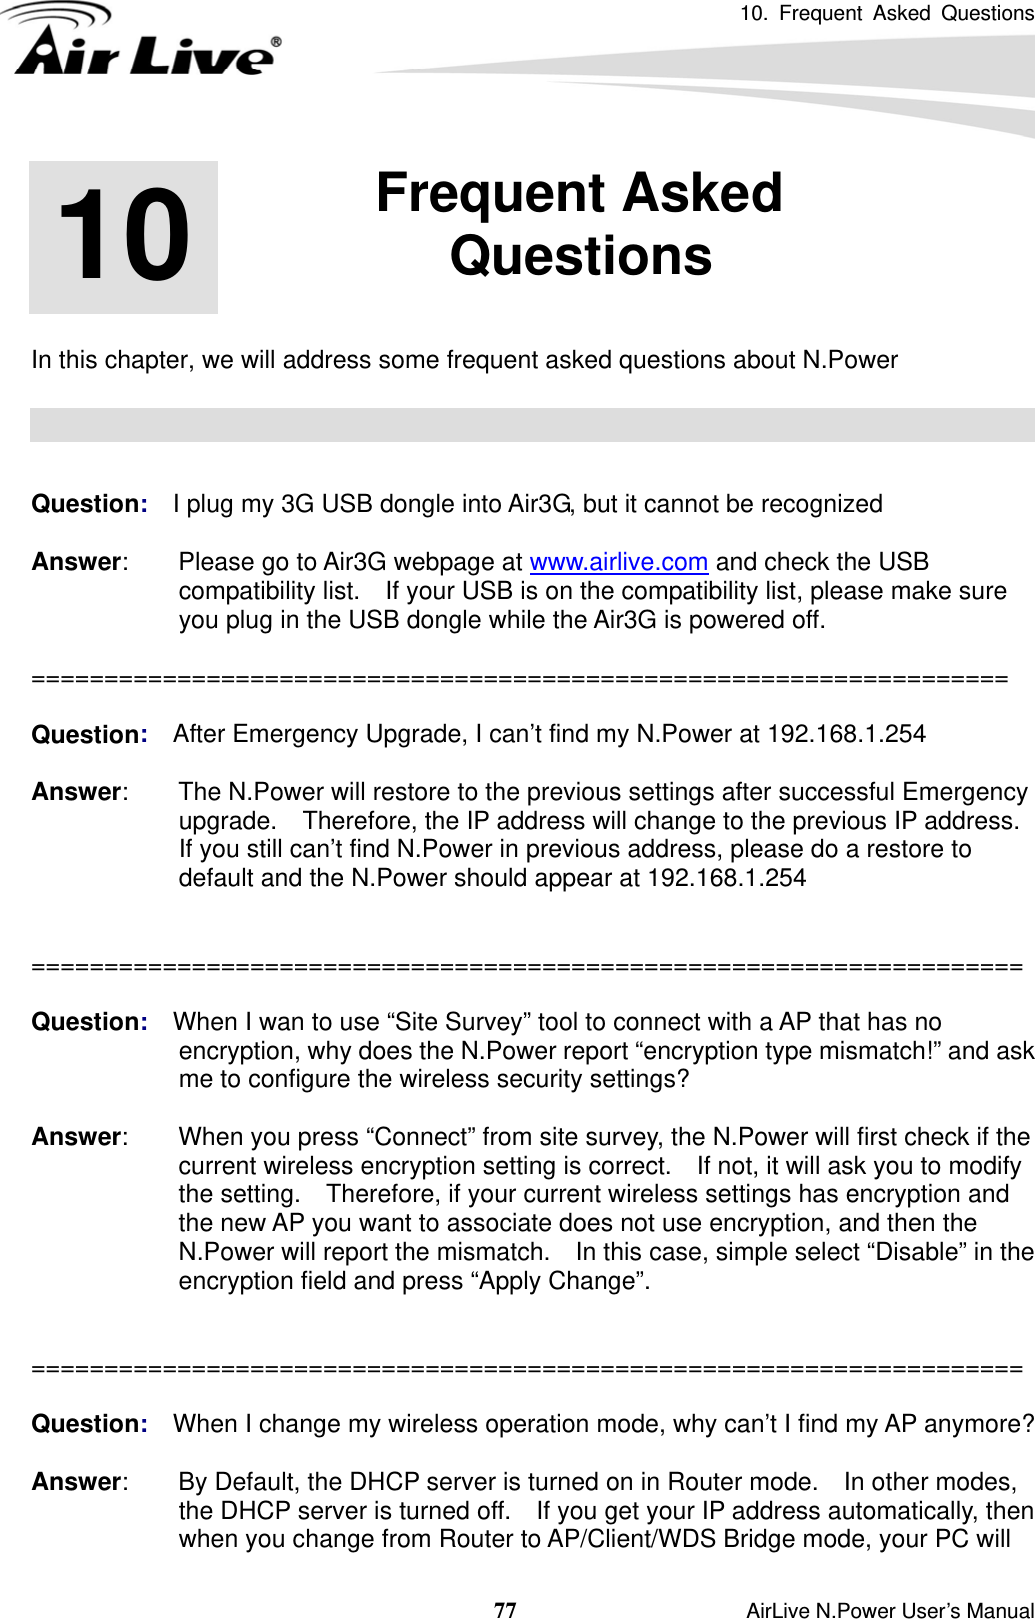 10. Frequent Asked Questions  77                    AirLive N.Power User’s Manual       In this chapter, we will address some frequent asked questions about N.Power     Question:  I plug my 3G USB dongle into Air3G, but it cannot be recognized  Answer:    Please go to Air3G webpage at www.airlive.com and check the USB compatibility list.    If your USB is on the compatibility list, please make sure you plug in the USB dongle while the Air3G is powered off.  ===================================================================  Question:  After Emergency Upgrade, I can’t find my N.Power at 192.168.1.254  Answer:        The N.Power will restore to the previous settings after successful Emergency upgrade.  Therefore, the IP address will change to the previous IP address.   If you still can’t find N.Power in previous address, please do a restore to default and the N.Power should appear at 192.168.1.254   ====================================================================  Question:  When I wan to use “Site Survey” tool to connect with a AP that has no encryption, why does the N.Power report “encryption type mismatch!” and ask me to configure the wireless security settings?  Answer:        When you press “Connect” from site survey, the N.Power will first check if the current wireless encryption setting is correct.    If not, it will ask you to modify the setting.    Therefore, if your current wireless settings has encryption and the new AP you want to associate does not use encryption, and then the N.Power will report the mismatch.    In this case, simple select “Disable” in the encryption field and press “Apply Change”.   ====================================================================  Question:  When I change my wireless operation mode, why can’t I find my AP anymore?  Answer:        By Default, the DHCP server is turned on in Router mode.    In other modes, the DHCP server is turned off.    If you get your IP address automatically, then when you change from Router to AP/Client/WDS Bridge mode, your PC will 10  10. Frequent Asked Questions  